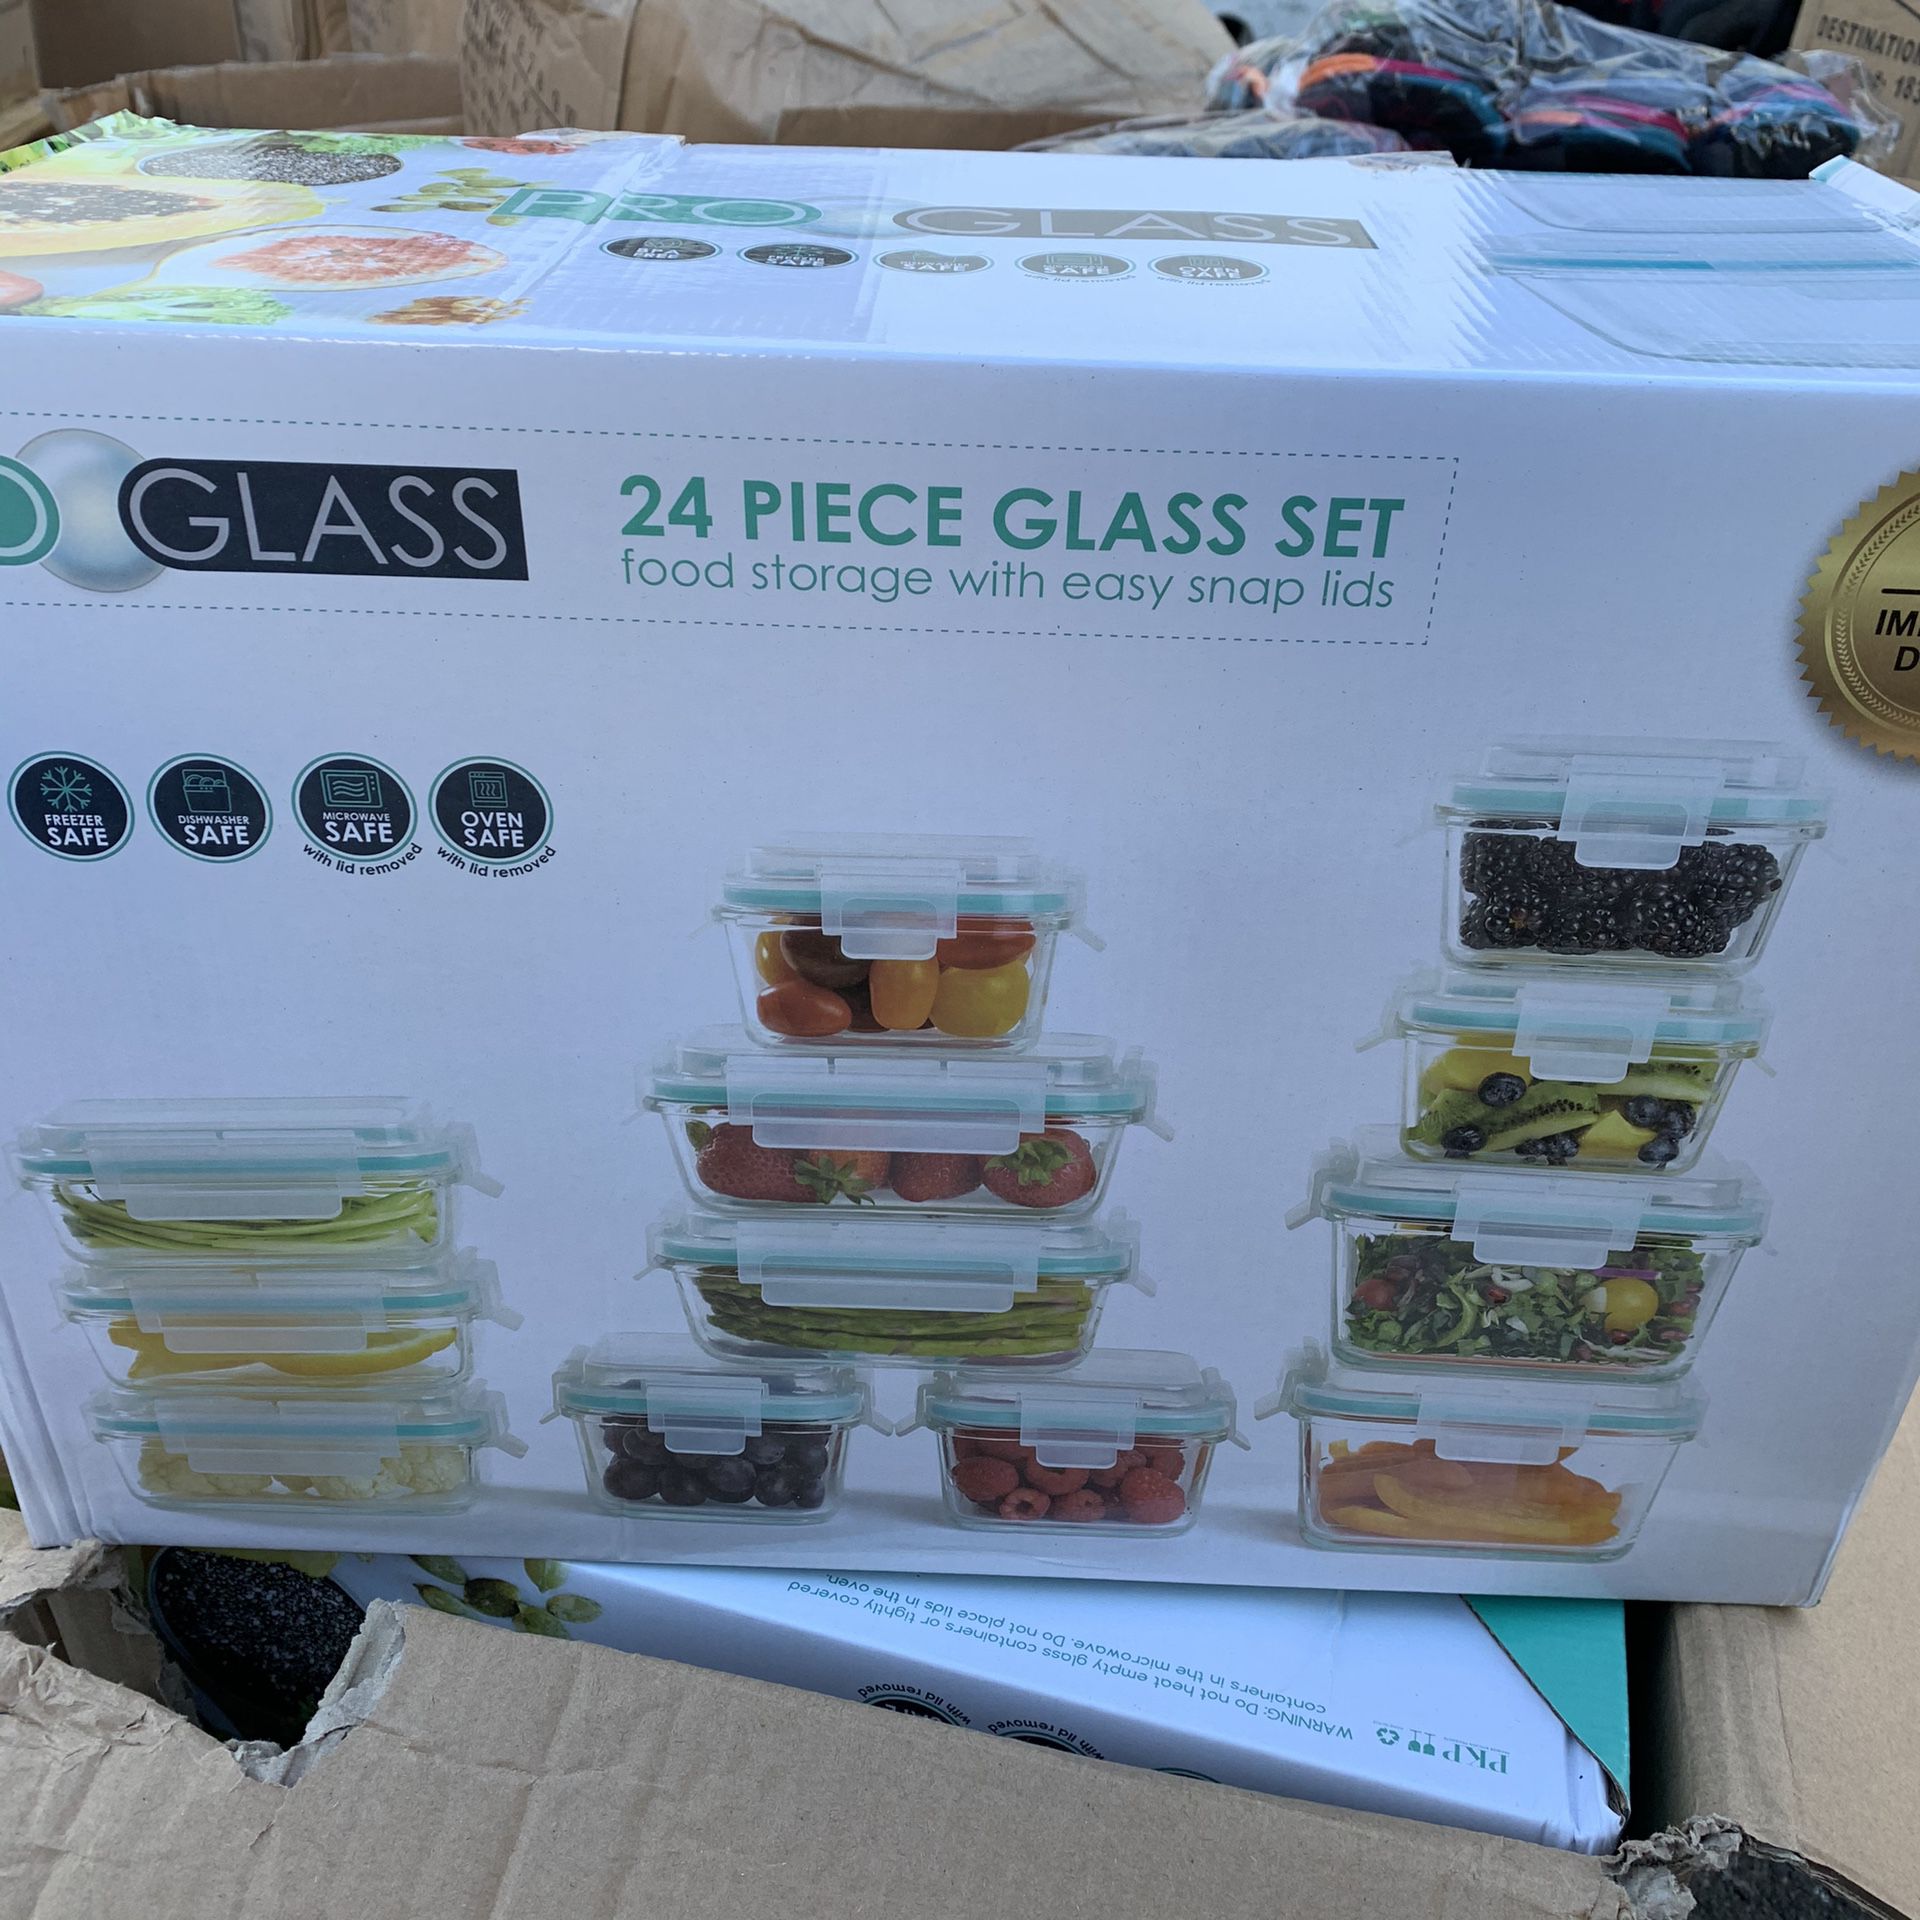 PRO GLASS 24 piece Glass food storage containers set